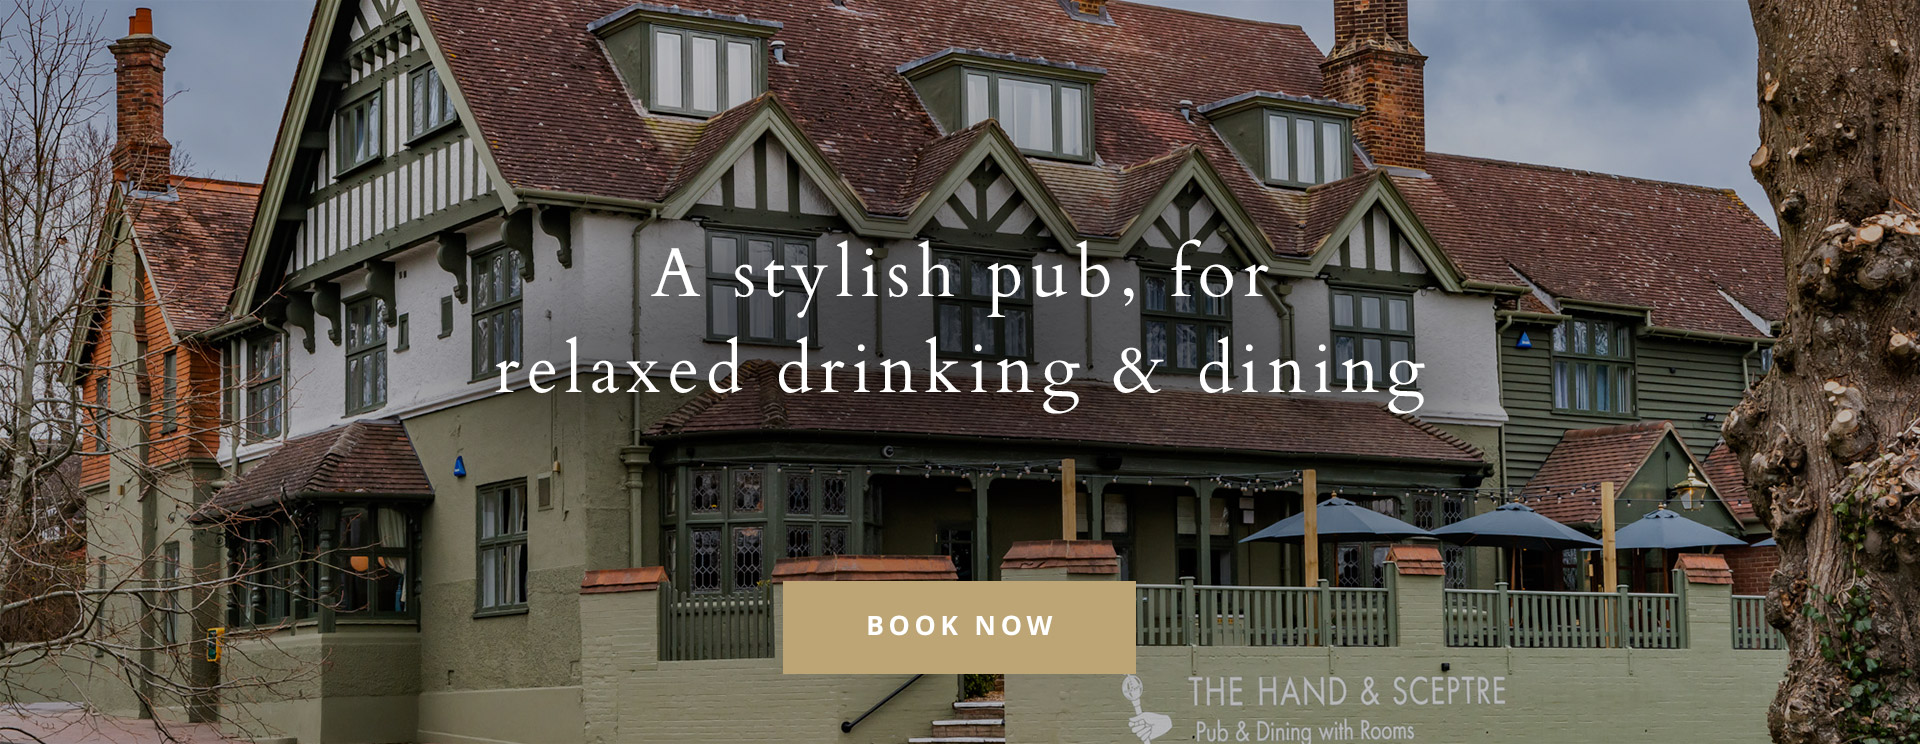 The Hand & Sceptre, a country pub in Tunbridge Wells